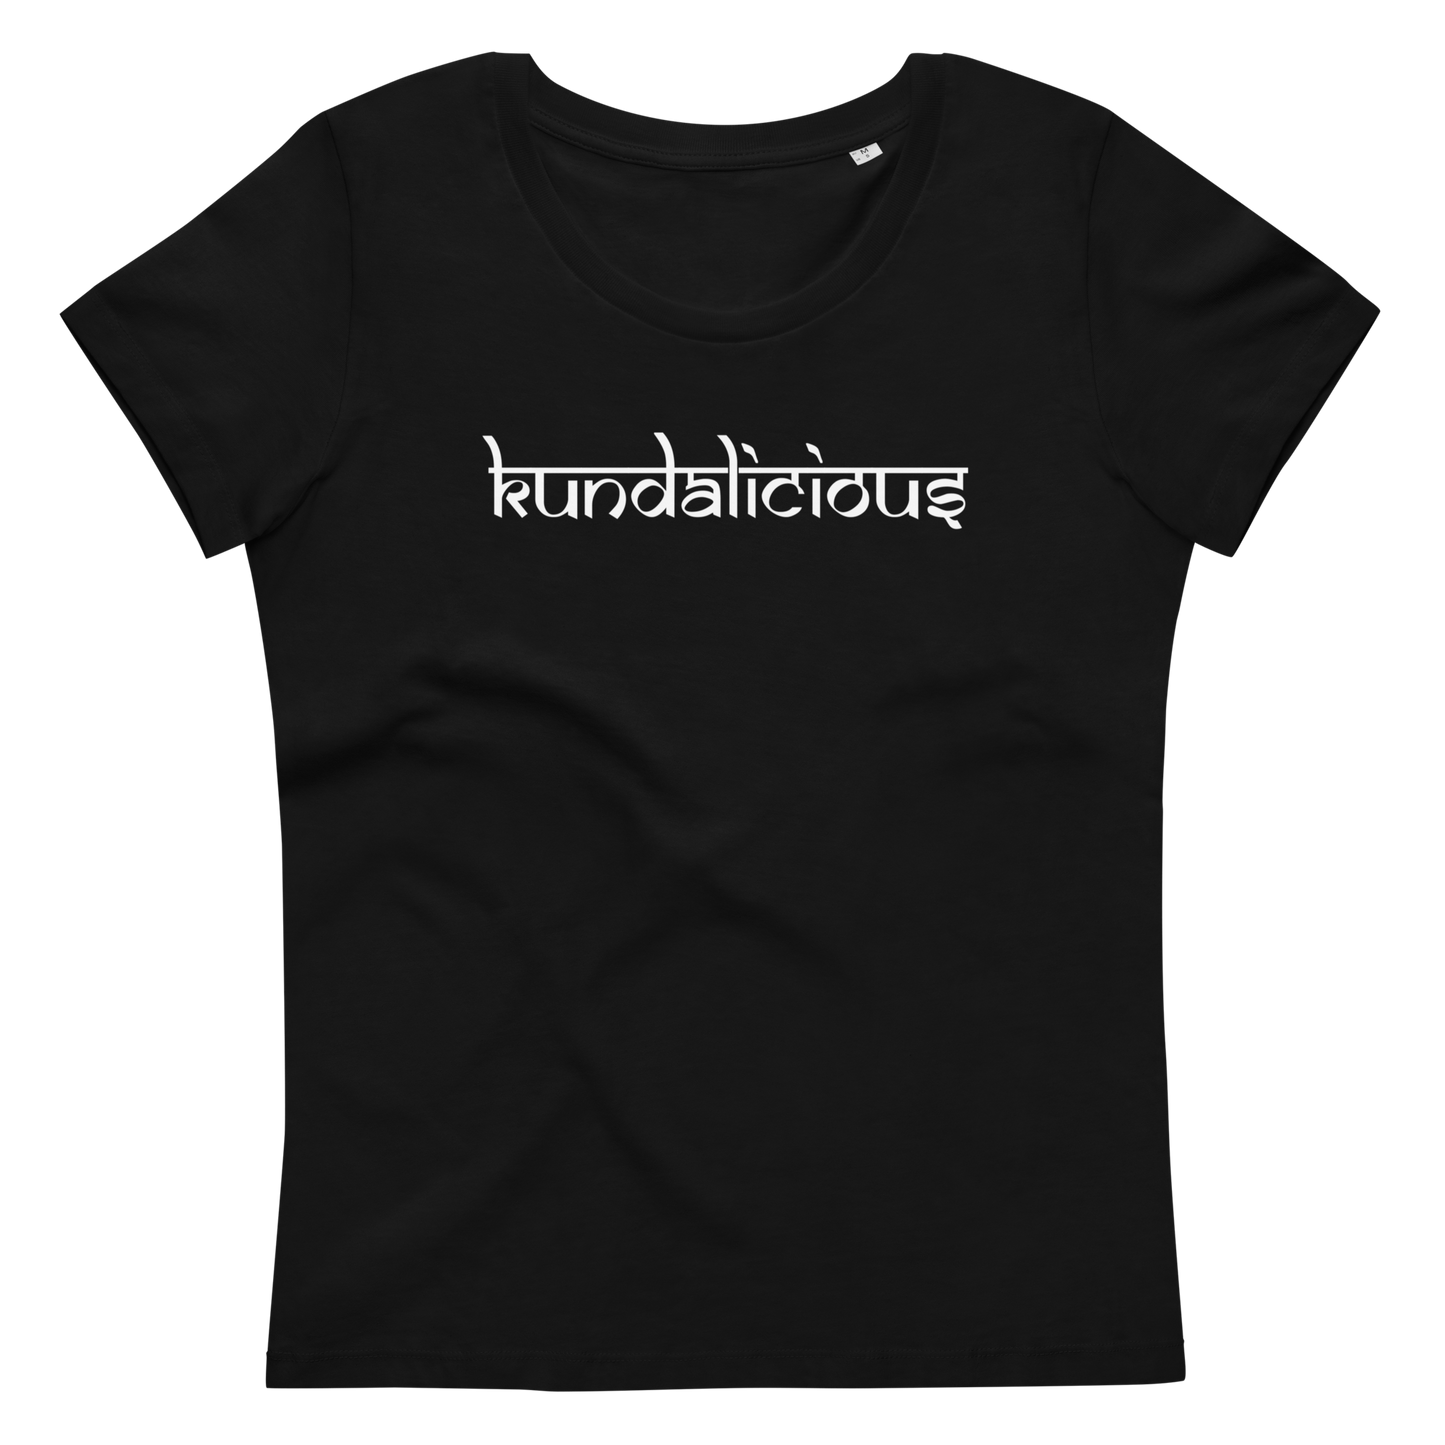 KUNDALICIOUS | Women's fitted eco tee